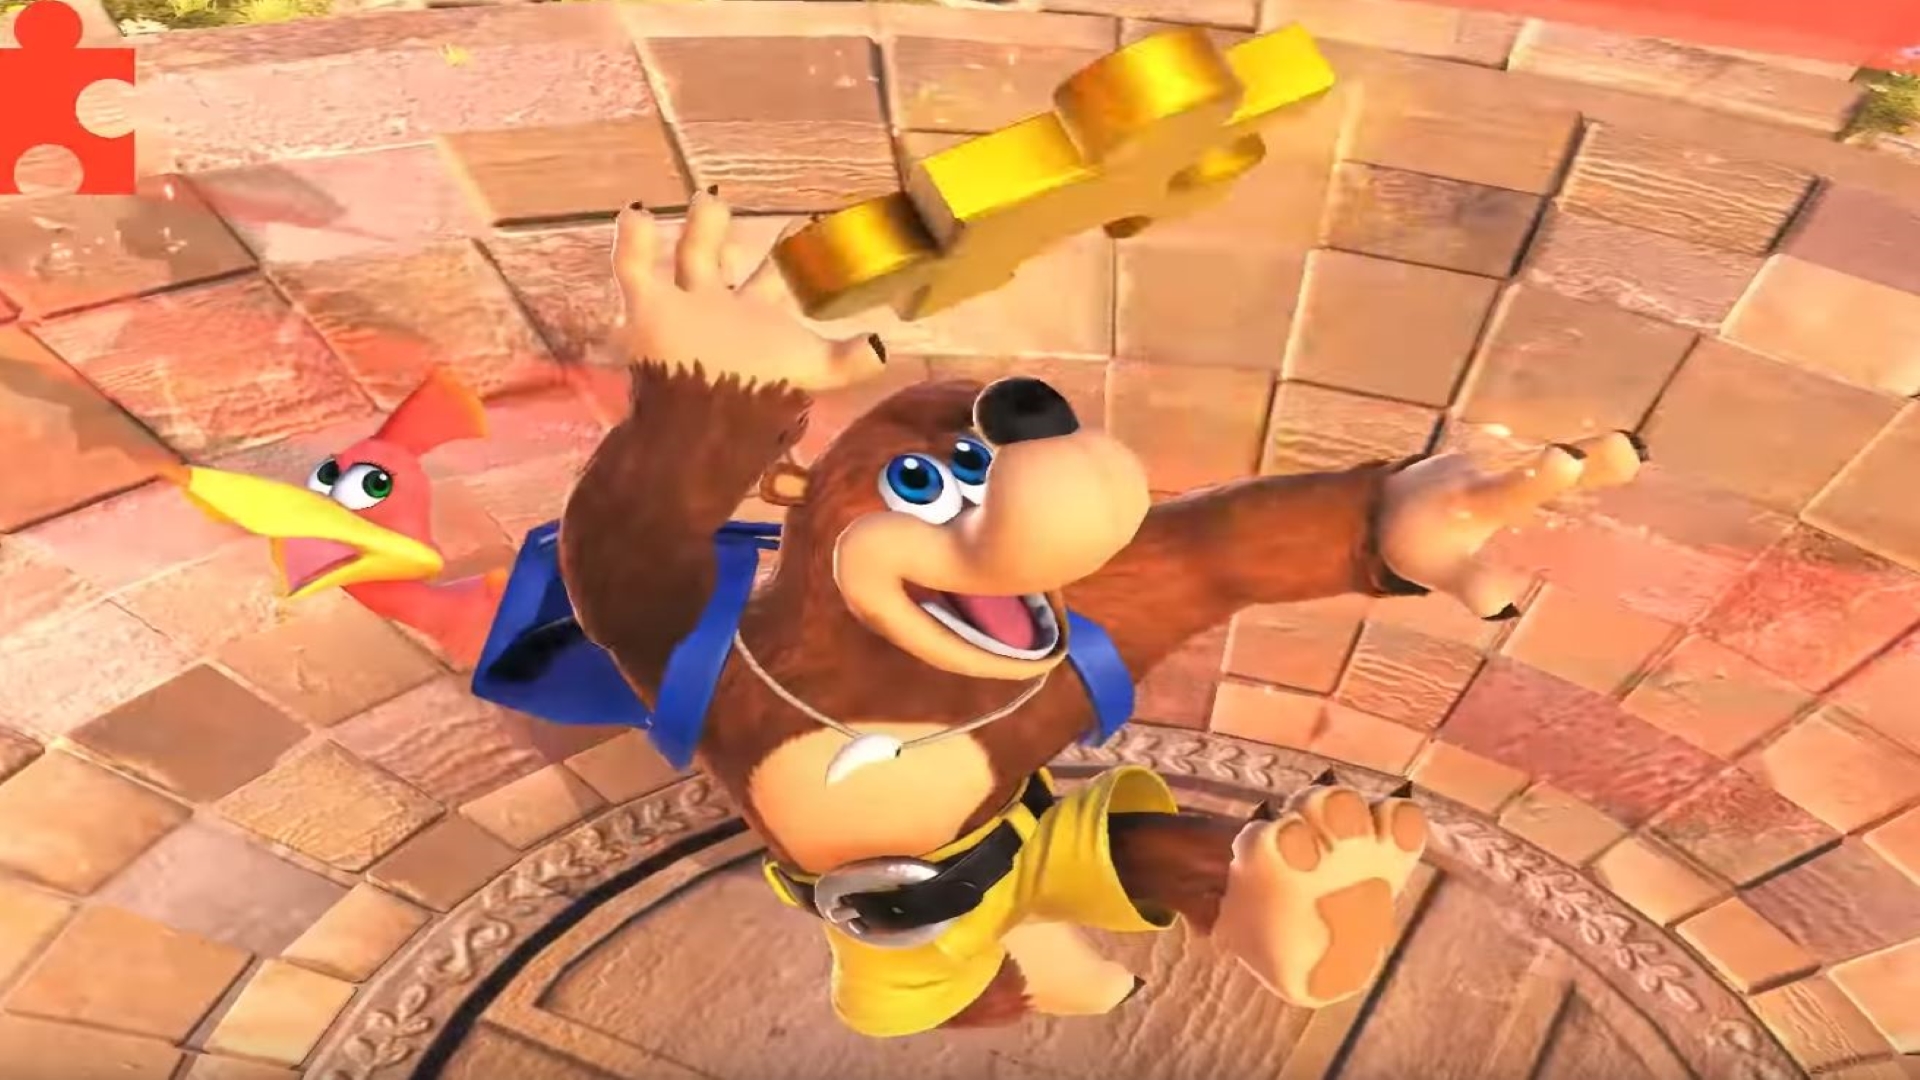 BanjoKazooie character creator wants to “gauge demand for a new game”